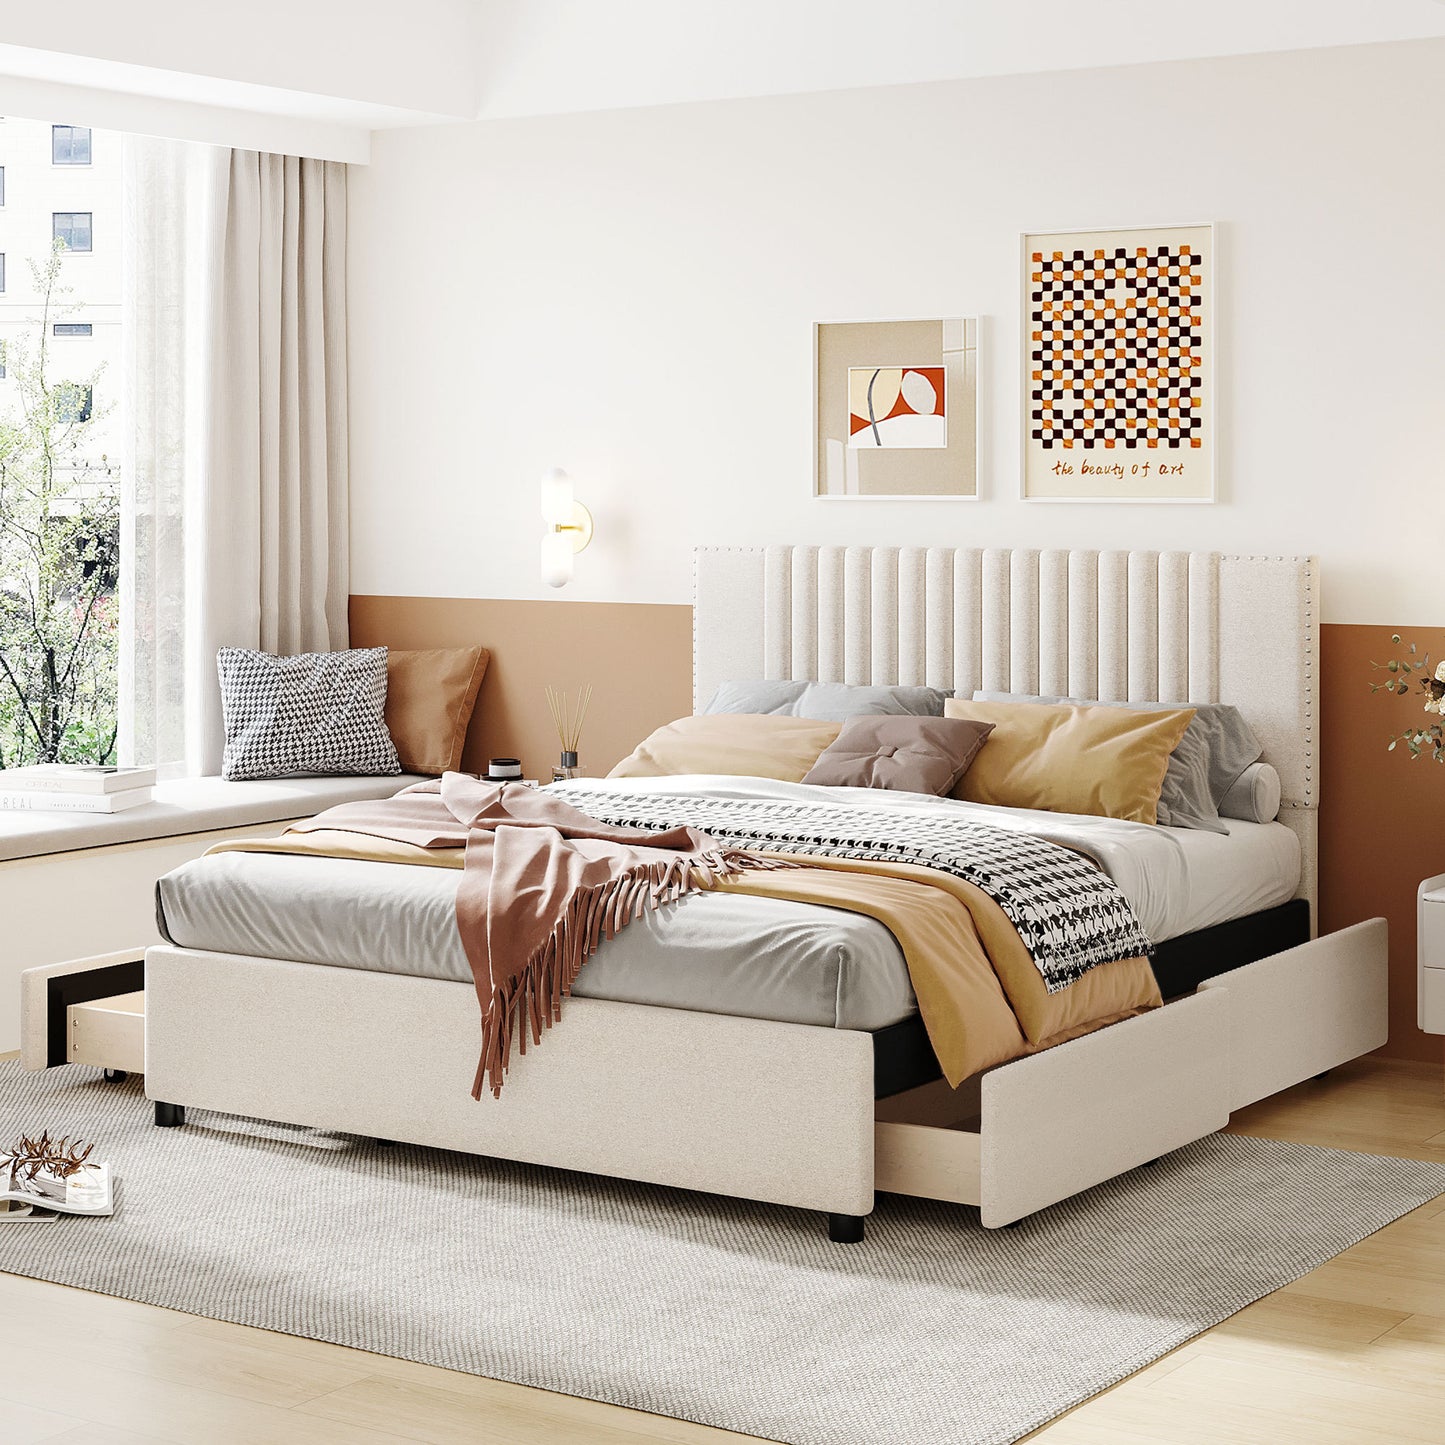 Queen Size Upholstered Platform Bed with Classic Headboard and 4 Drawers, Linen Fabric, Beige